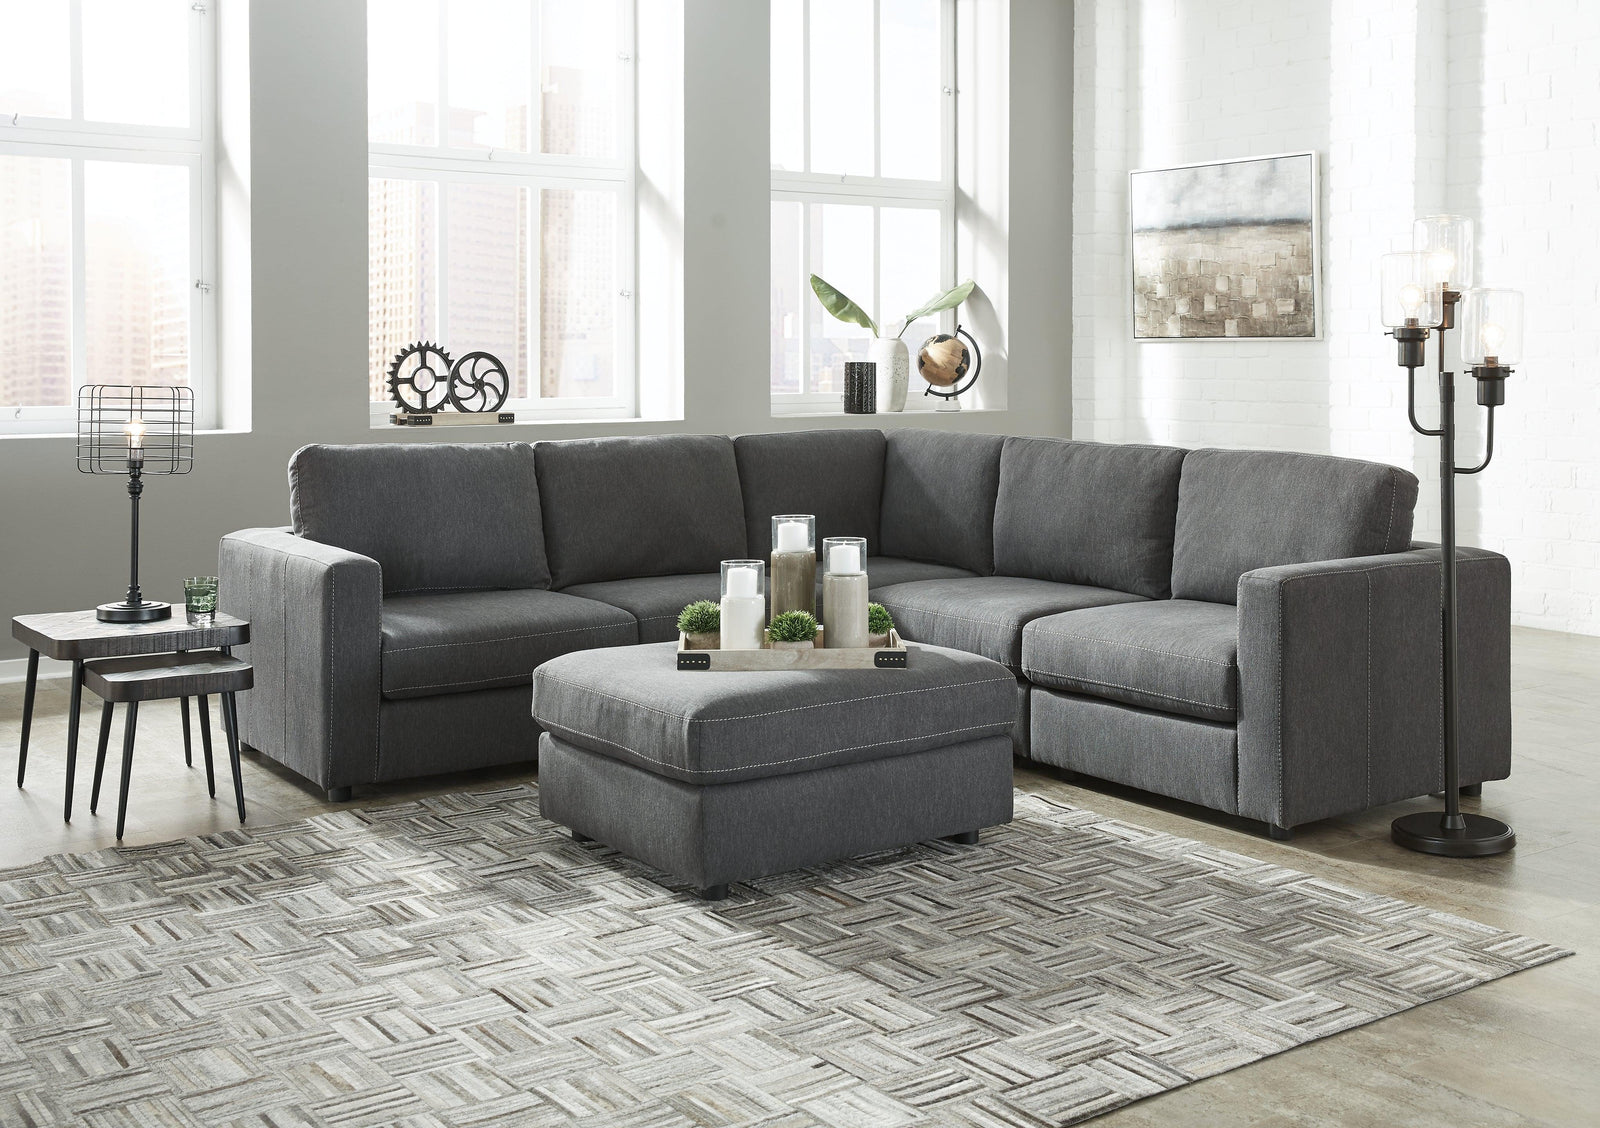 Candela Charcoal 5-Piece Sectional With Ottoman - Ella Furniture